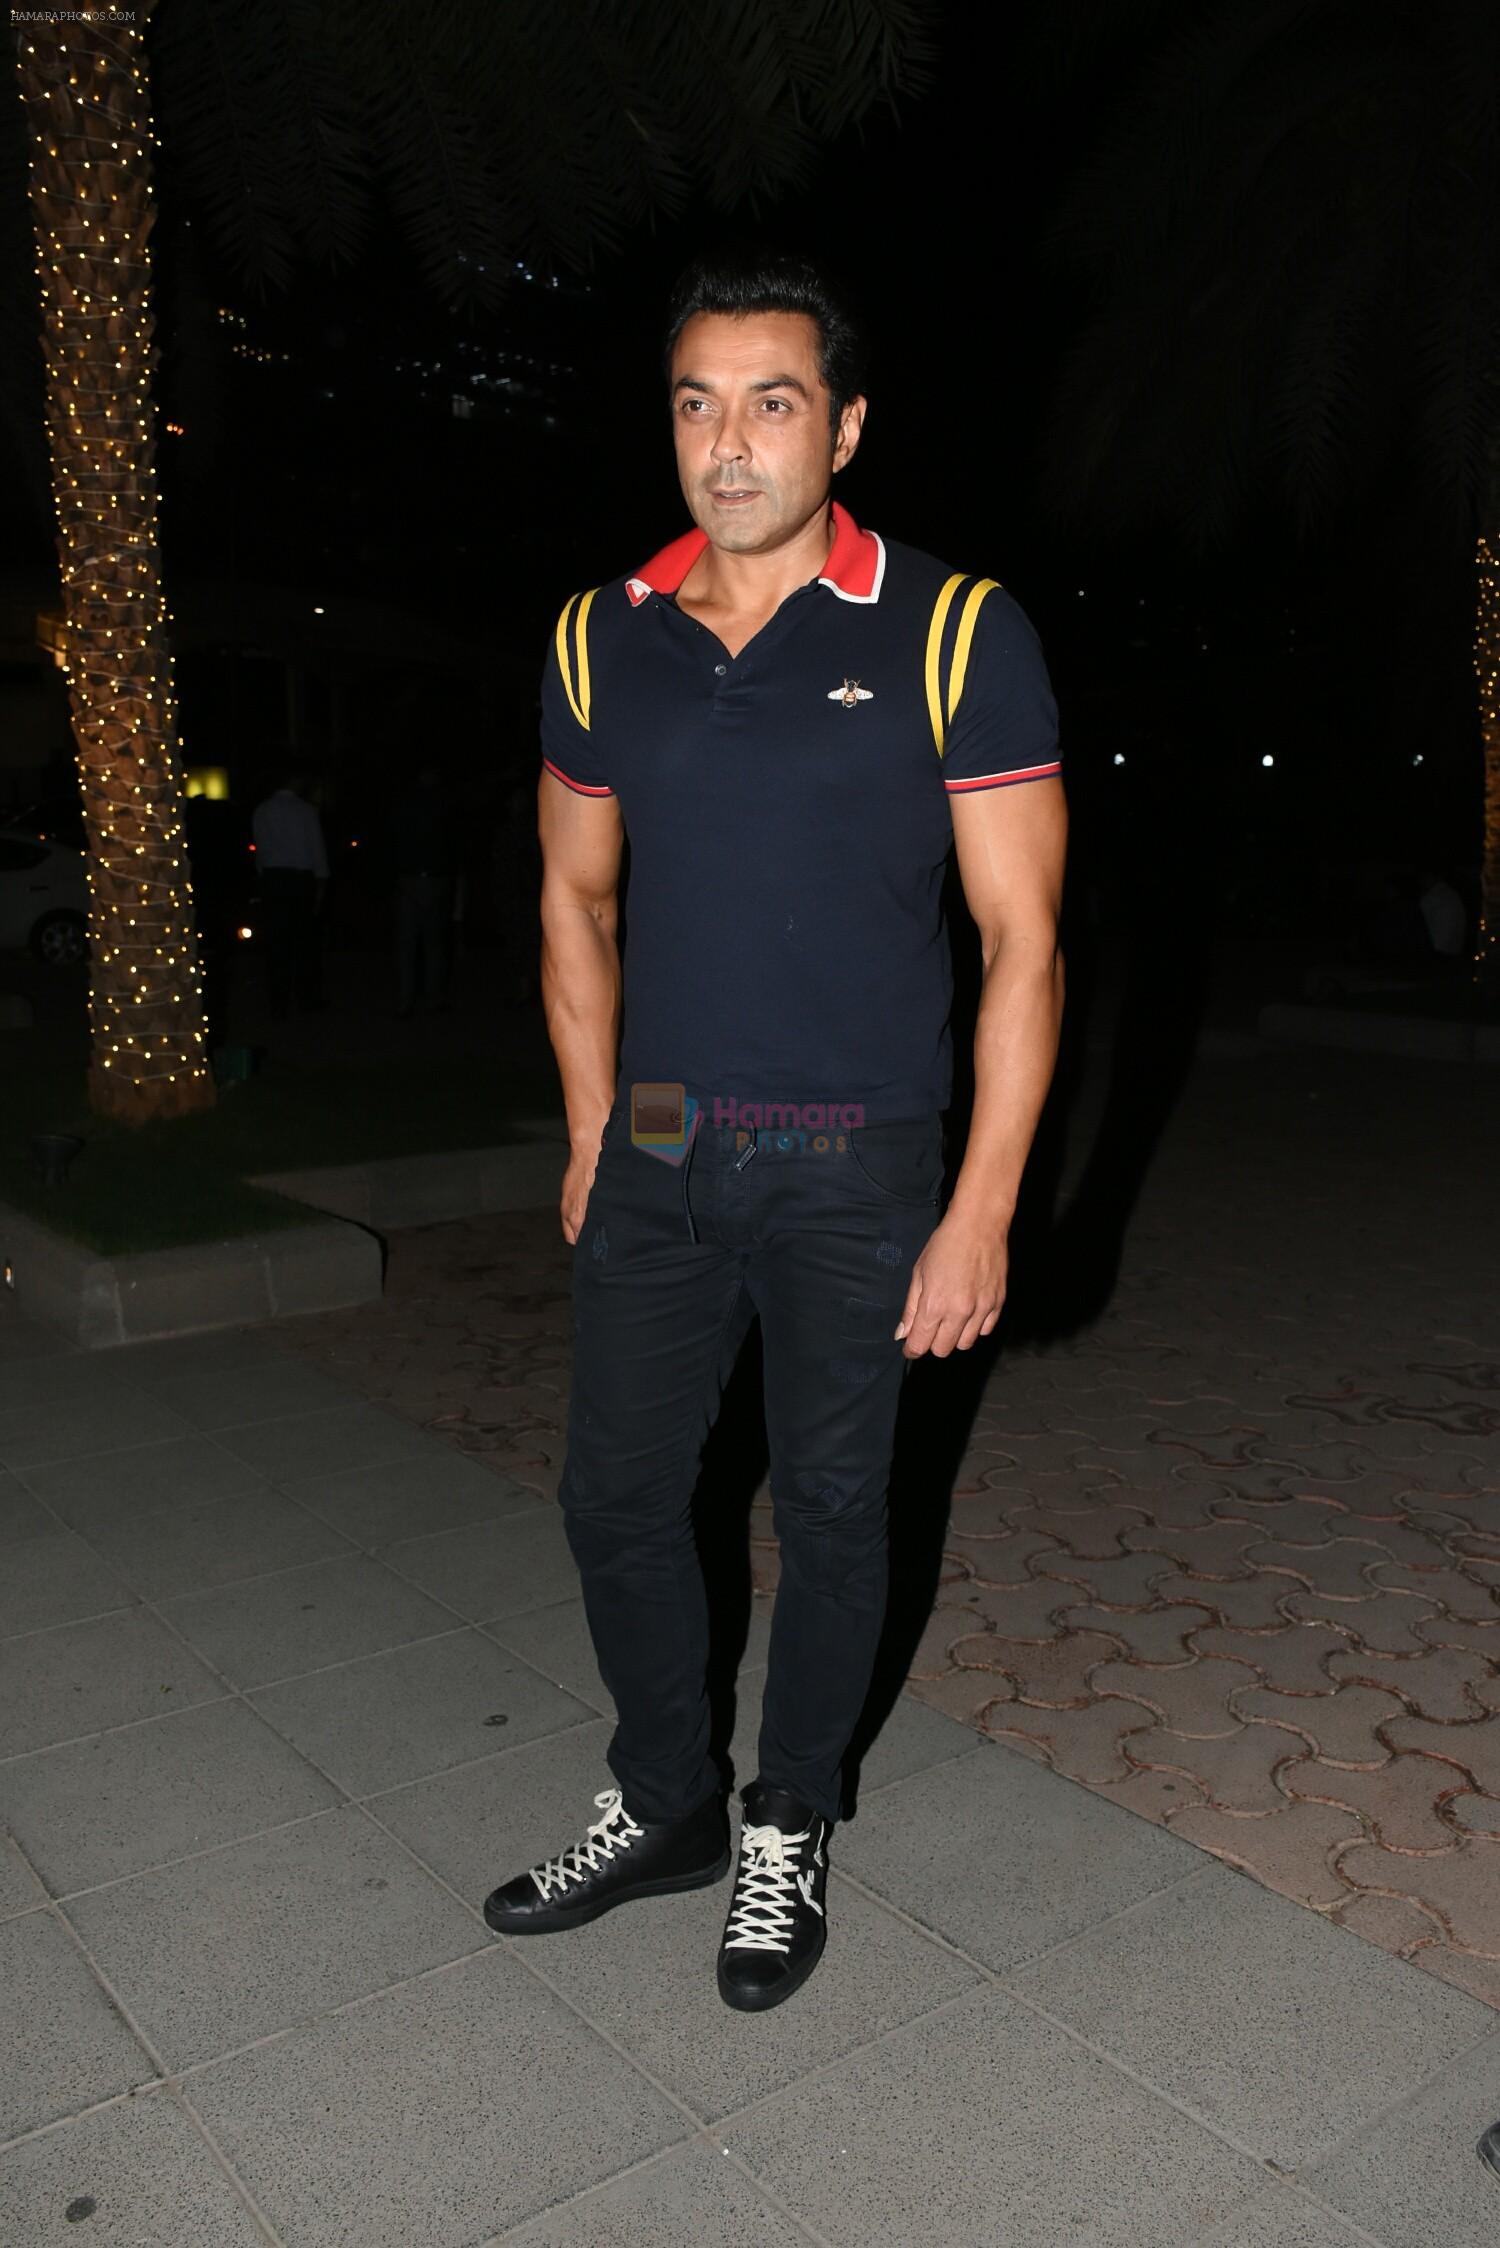 Bobby deol spotted at yautcha bkc on 30th May 2018